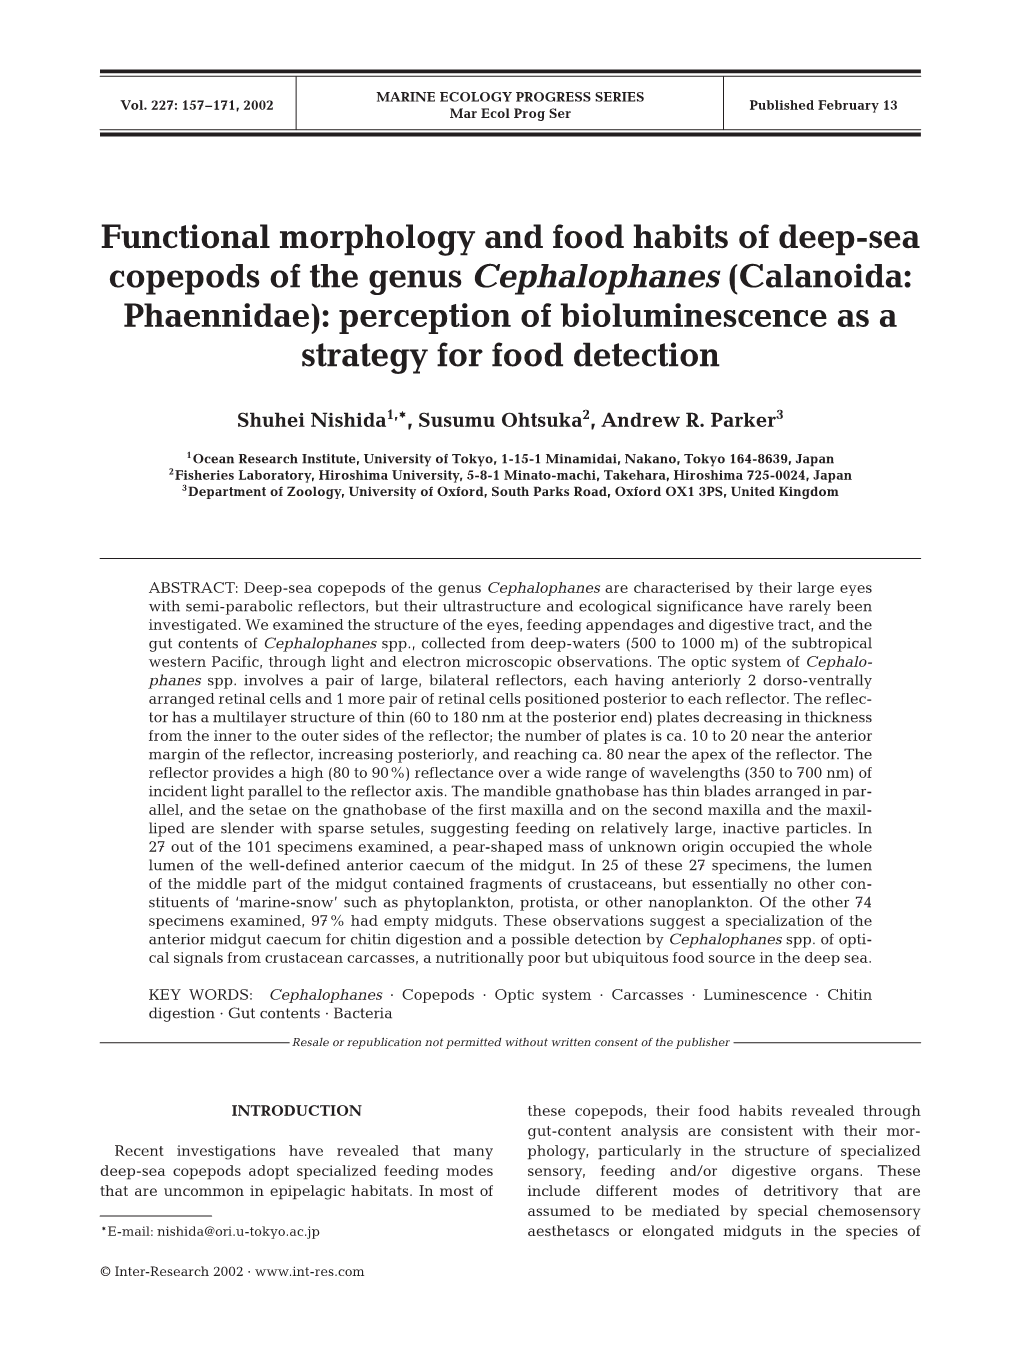 Functional Morphology and Food Habits of Deep-Sea Copepods of The